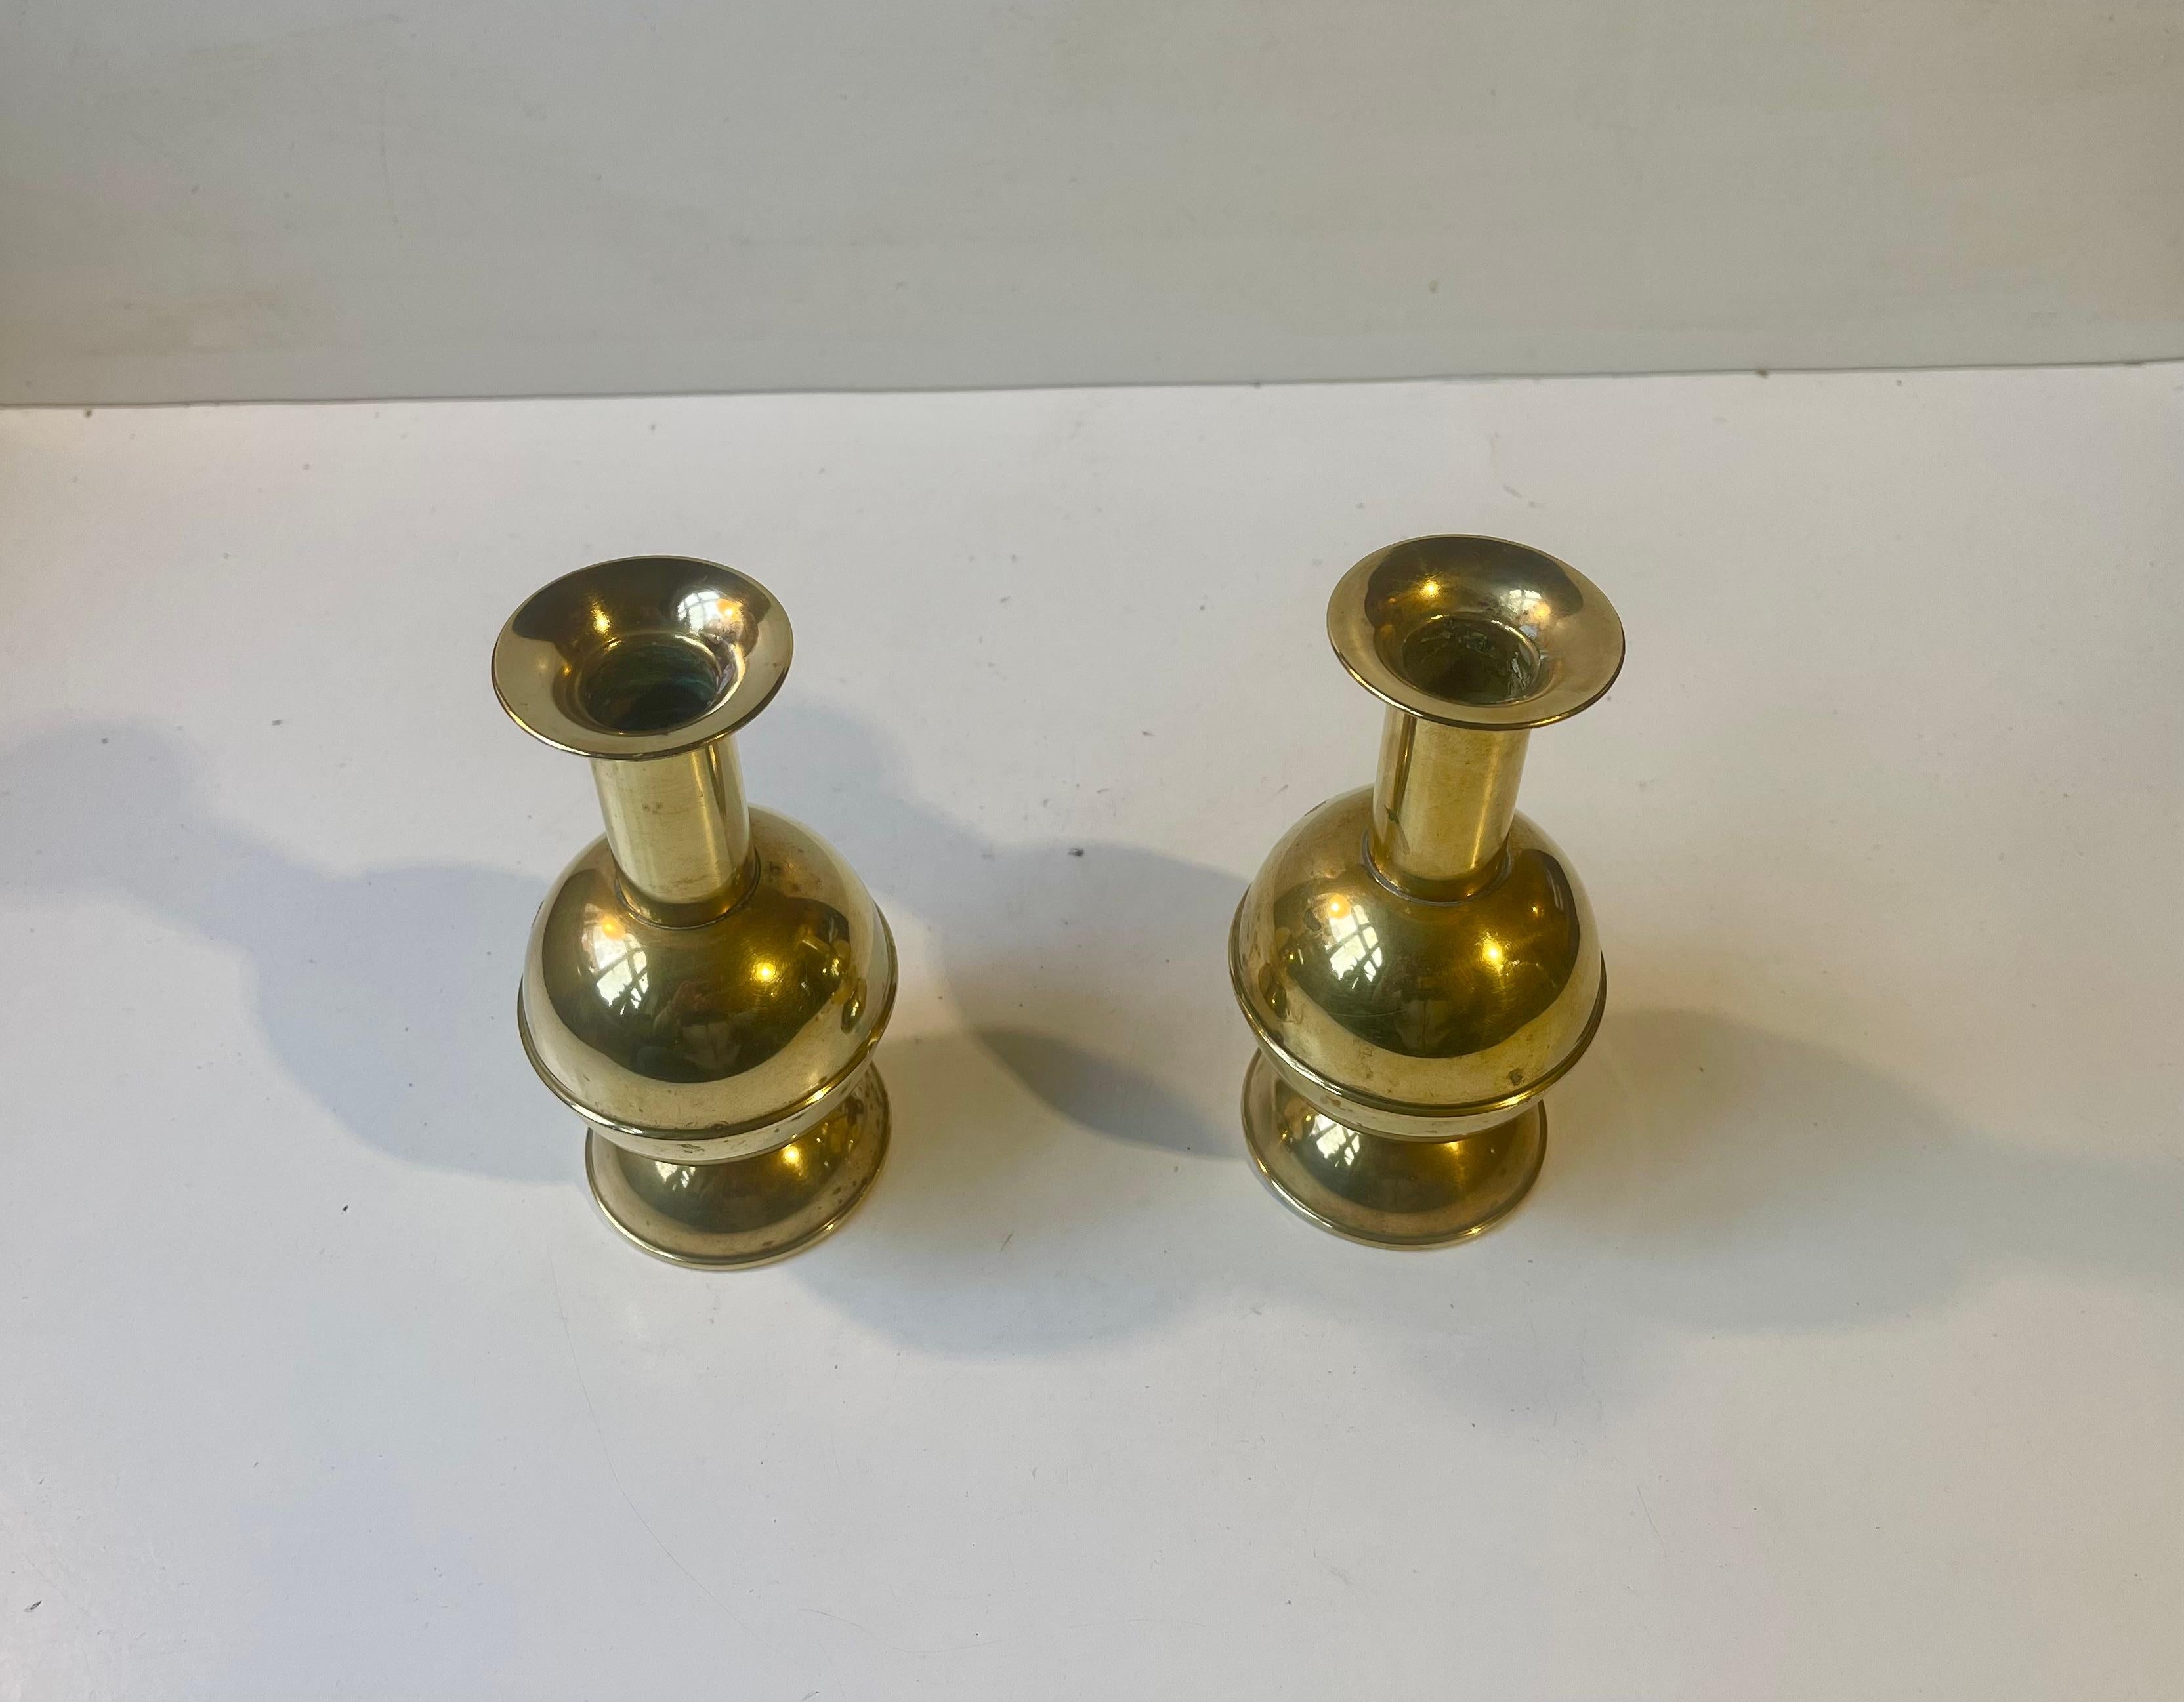 Architectural Scandinavian Candlesticks in Brass, 1970s In Good Condition For Sale In Esbjerg, DK